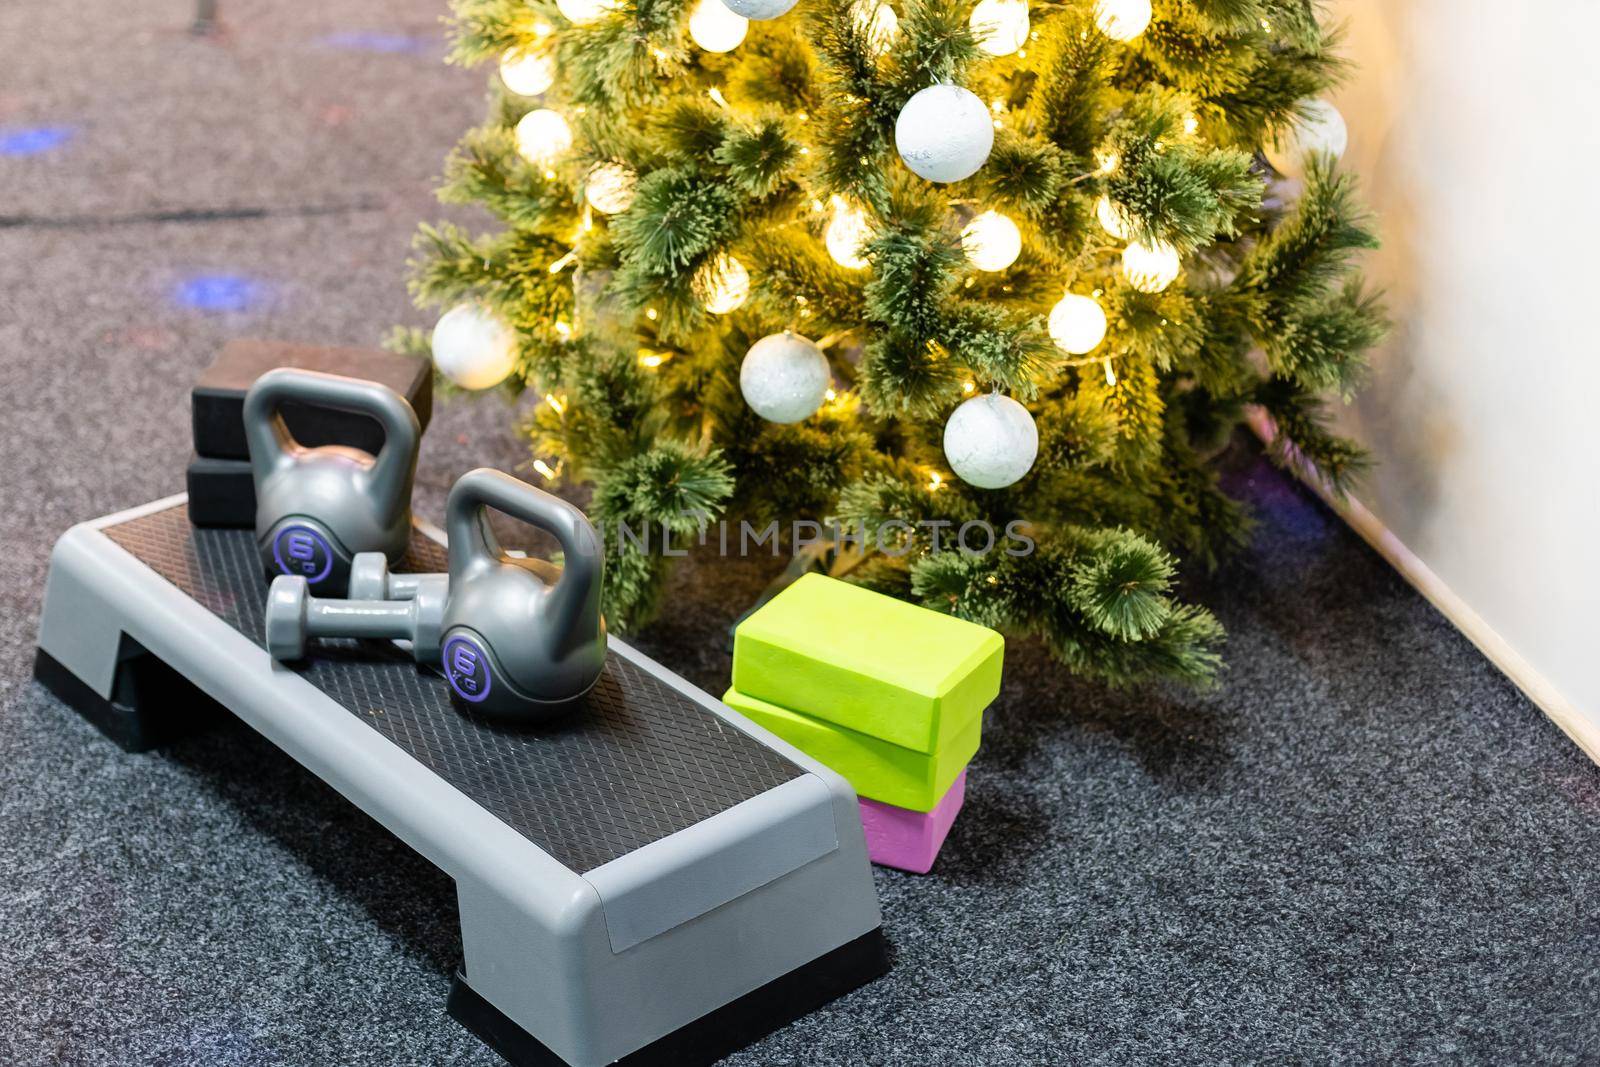 Christmas sports. Black sport step, kettlebell, yoga blocks. Merry christmas and Happy new year wish sport gifts greeting card concept top view with copy space.